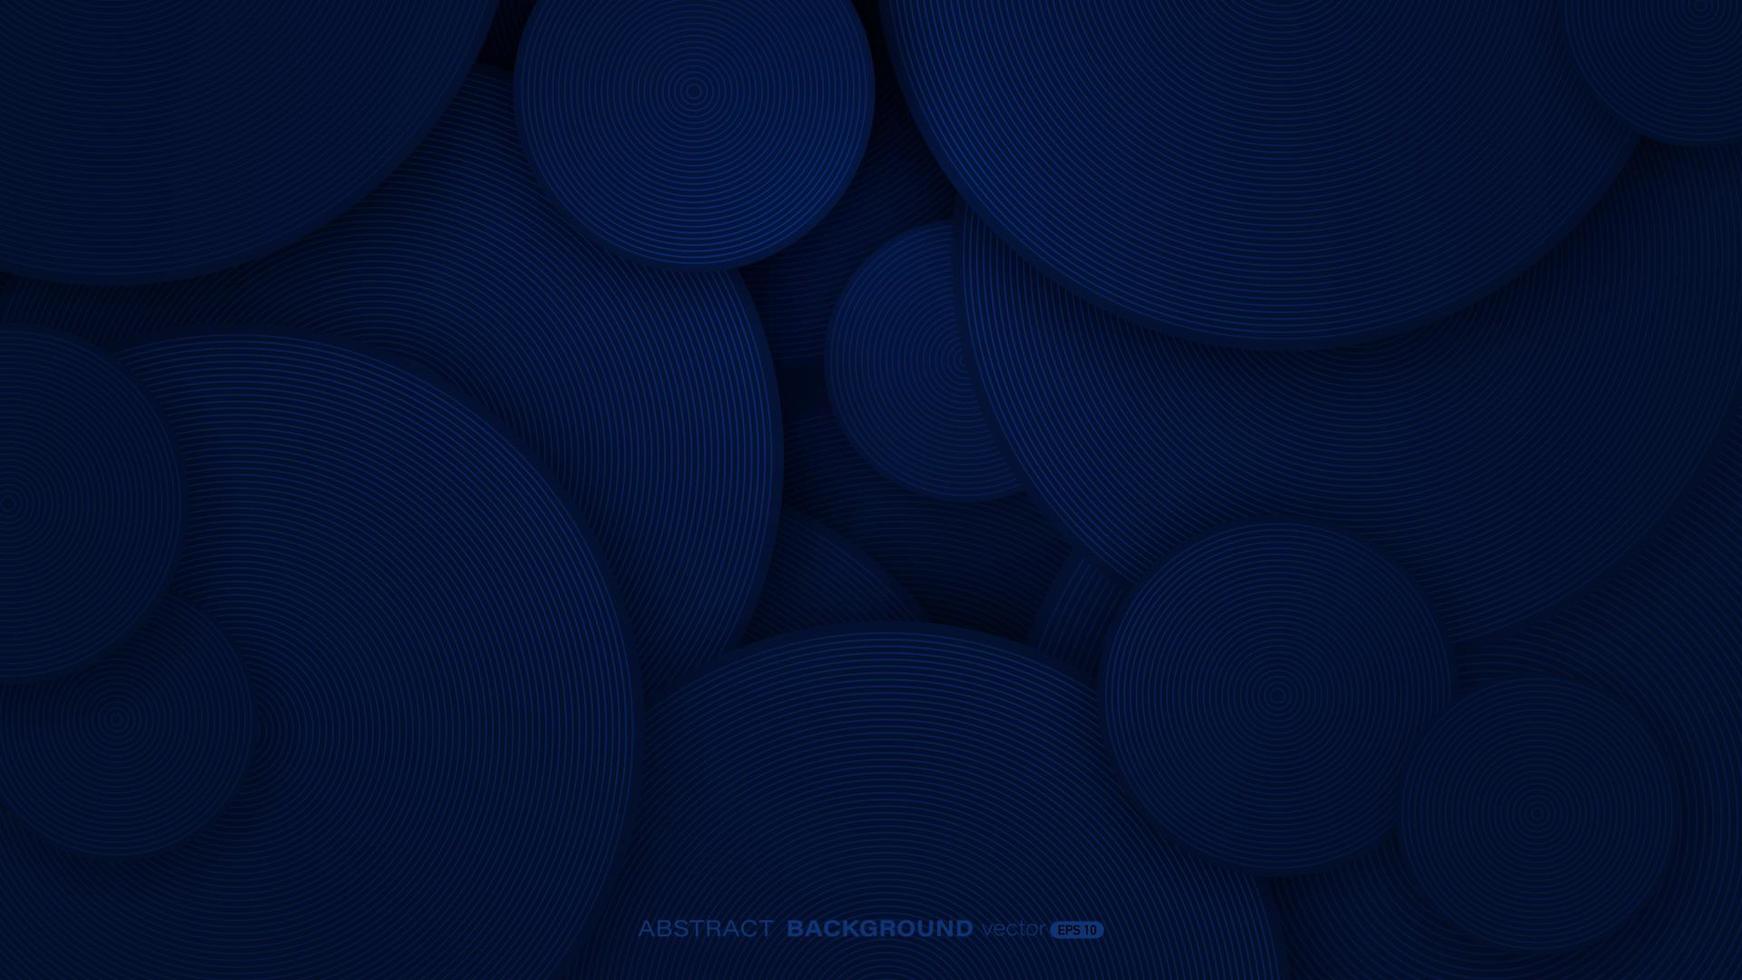 Concentric blue circles with overlapping pattern and shadow. Abstract background vector